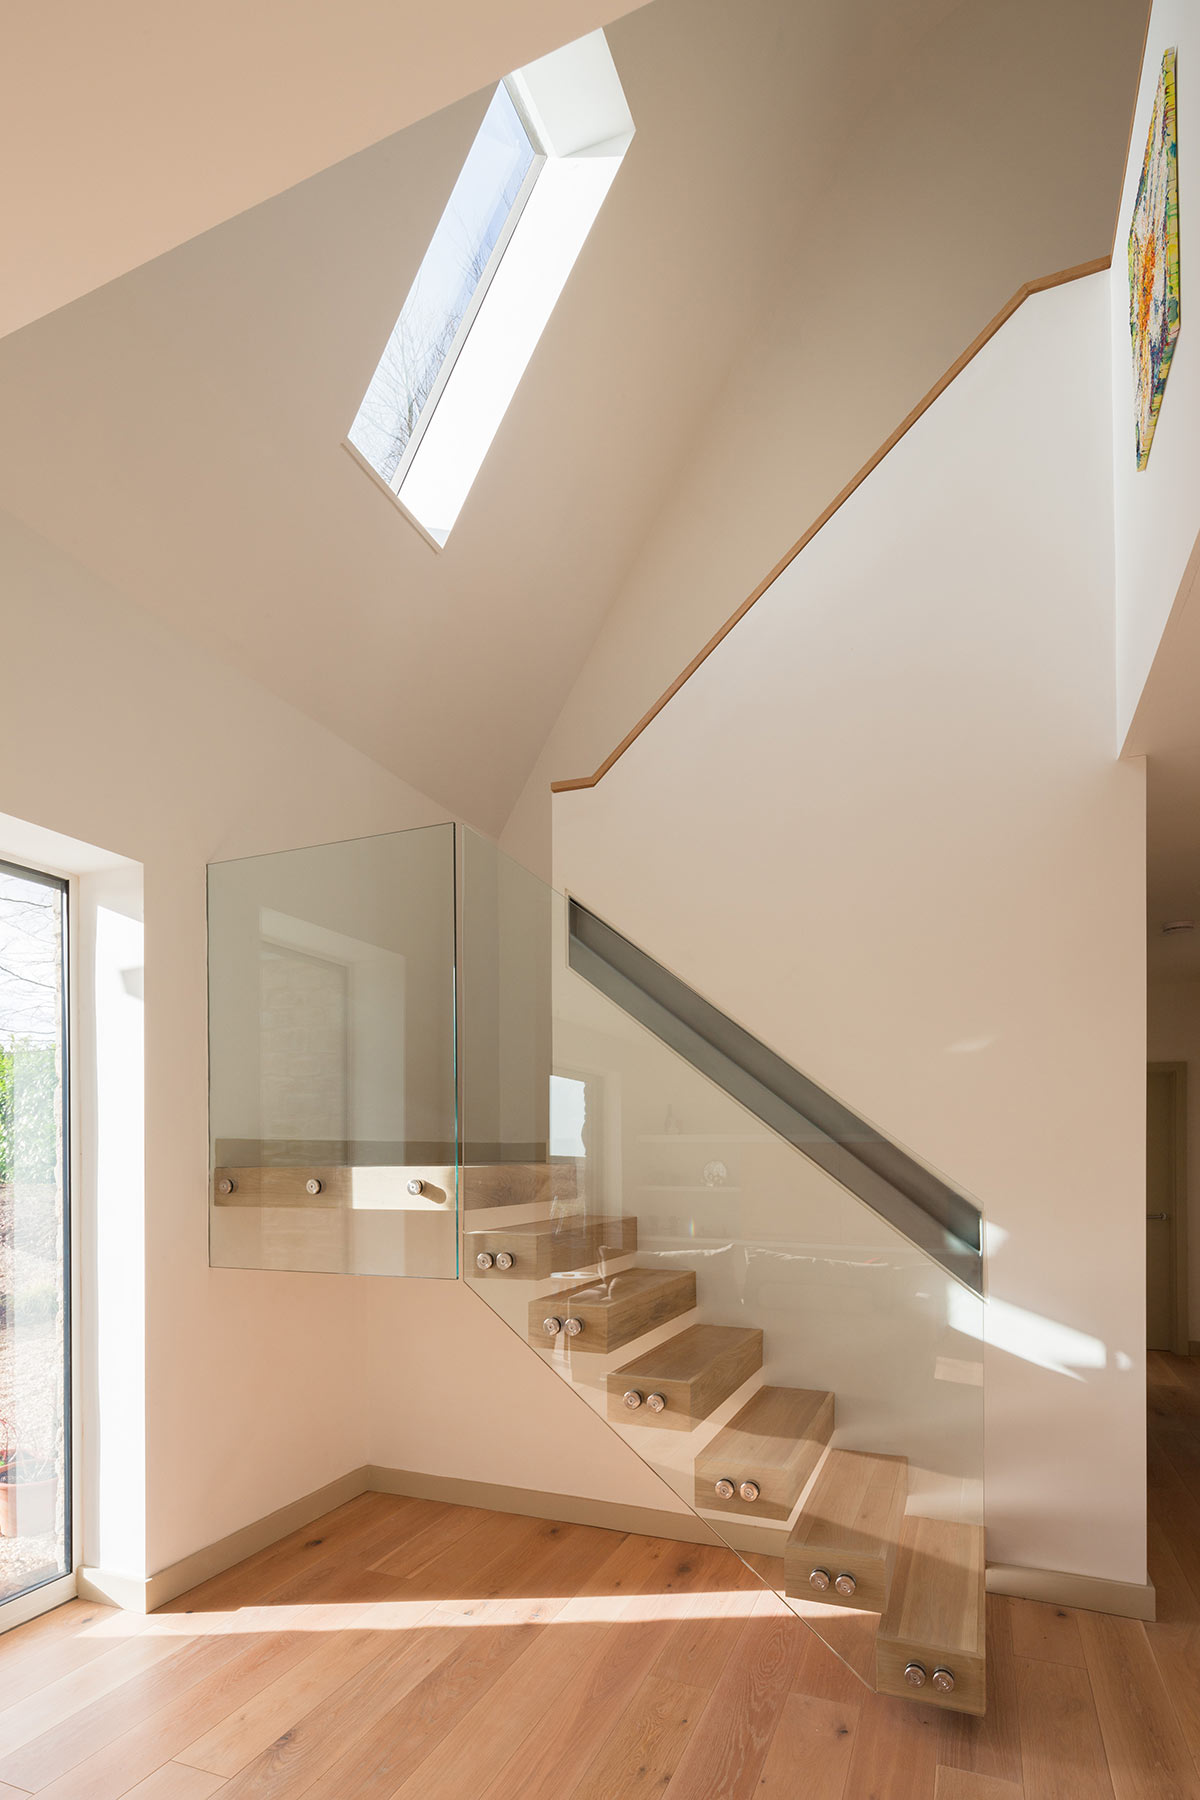 Broadmere Project - Adrian James Architects, Oxford